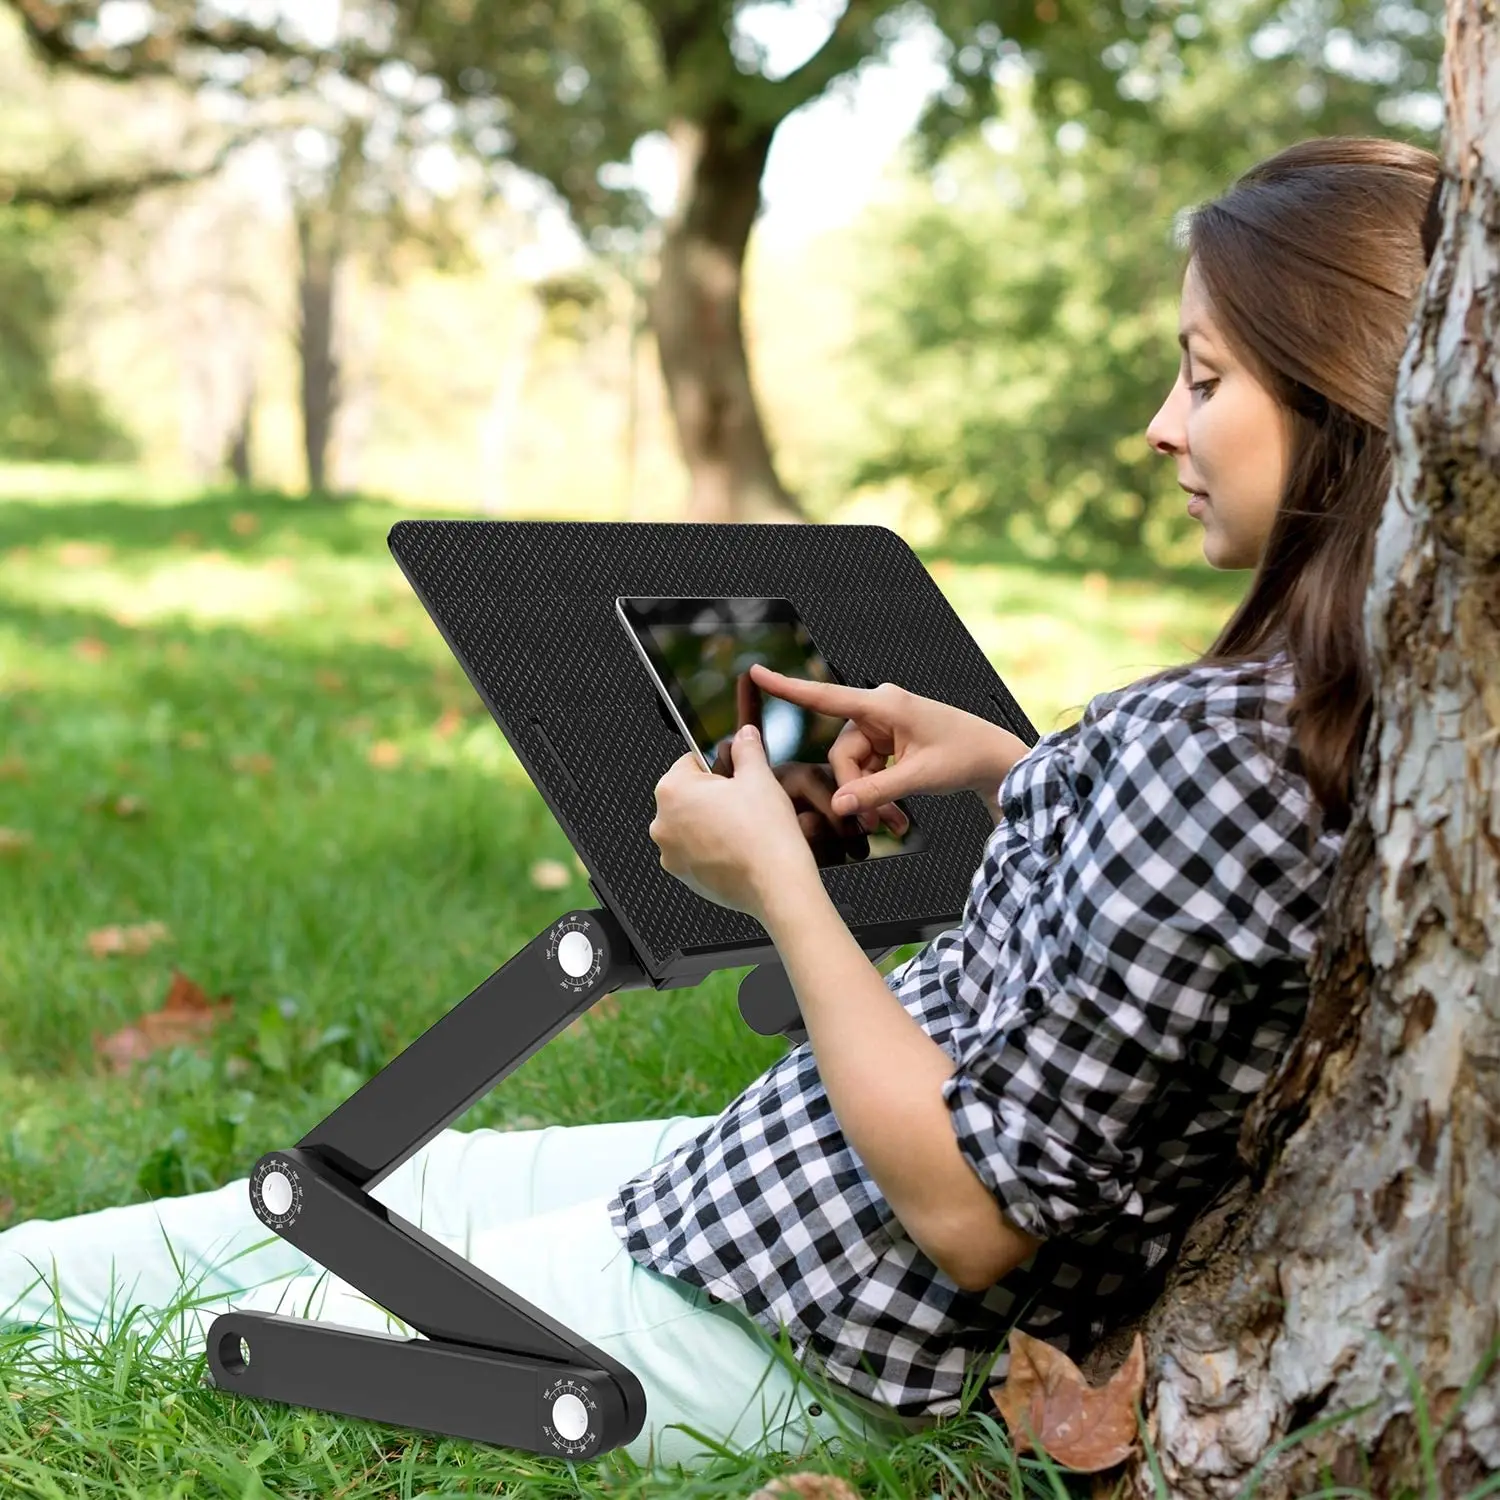 Amazon best selling Collapsible Ergonomic Laptop Notebook Stand For Bed